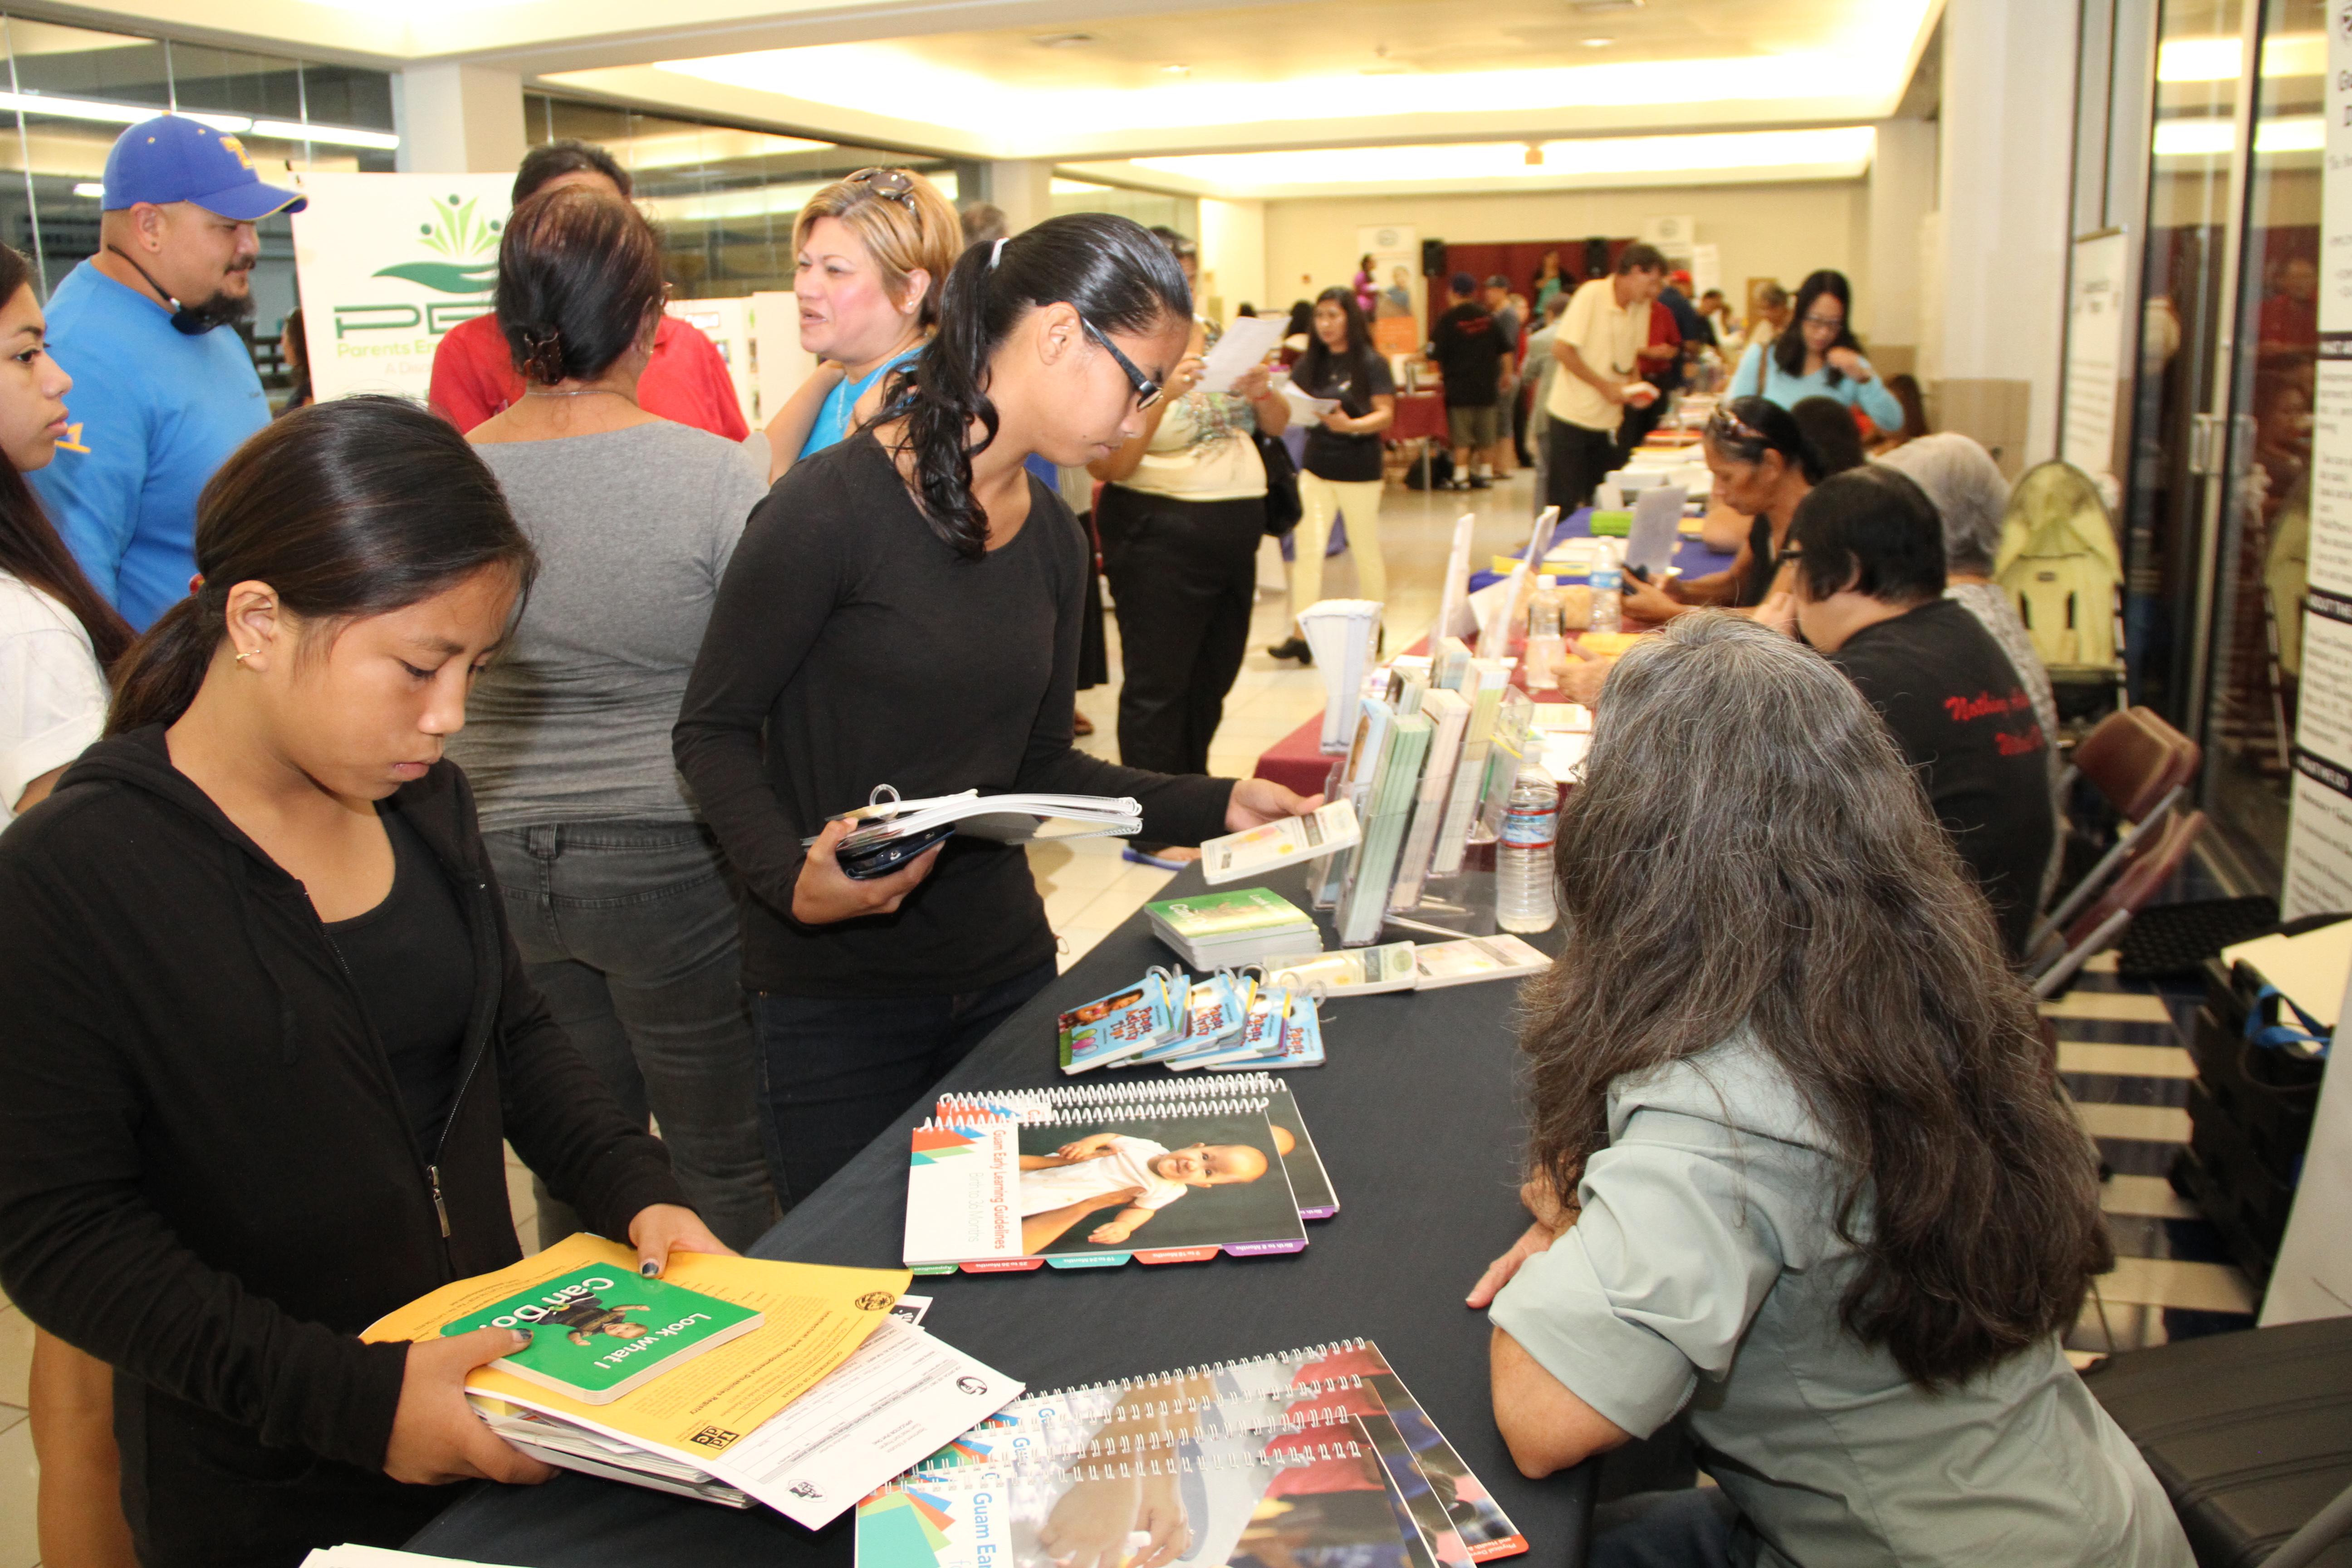 Fair participants review resources offered by the Guam Early Hearing Detection and Intervention (Guam EHDI) Program.